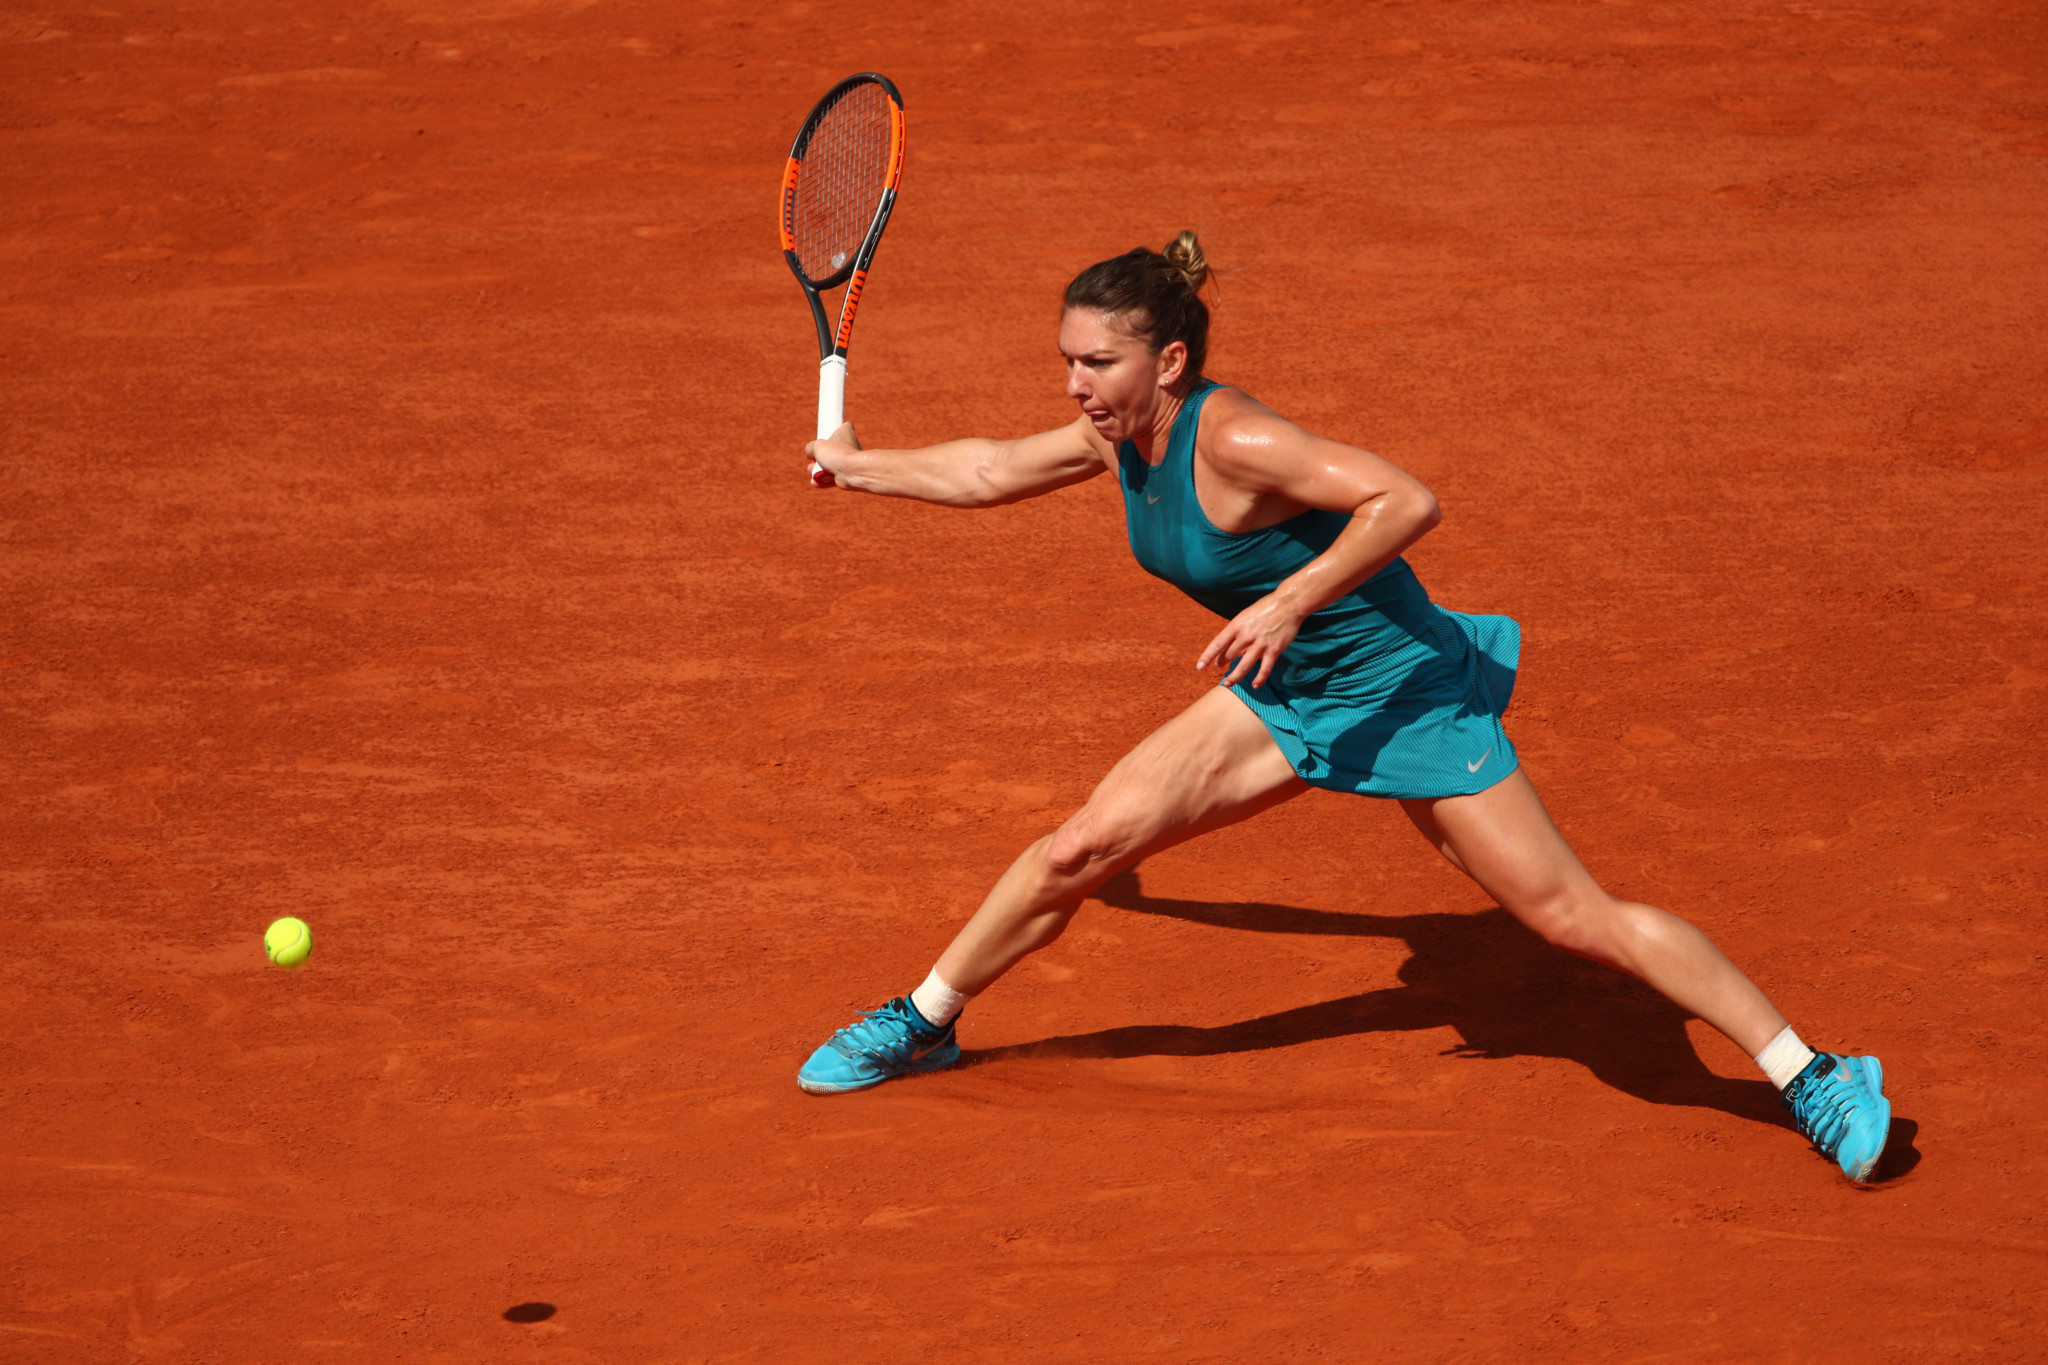 Simona Halep also booked her spot in the last 16 ©Getty Images